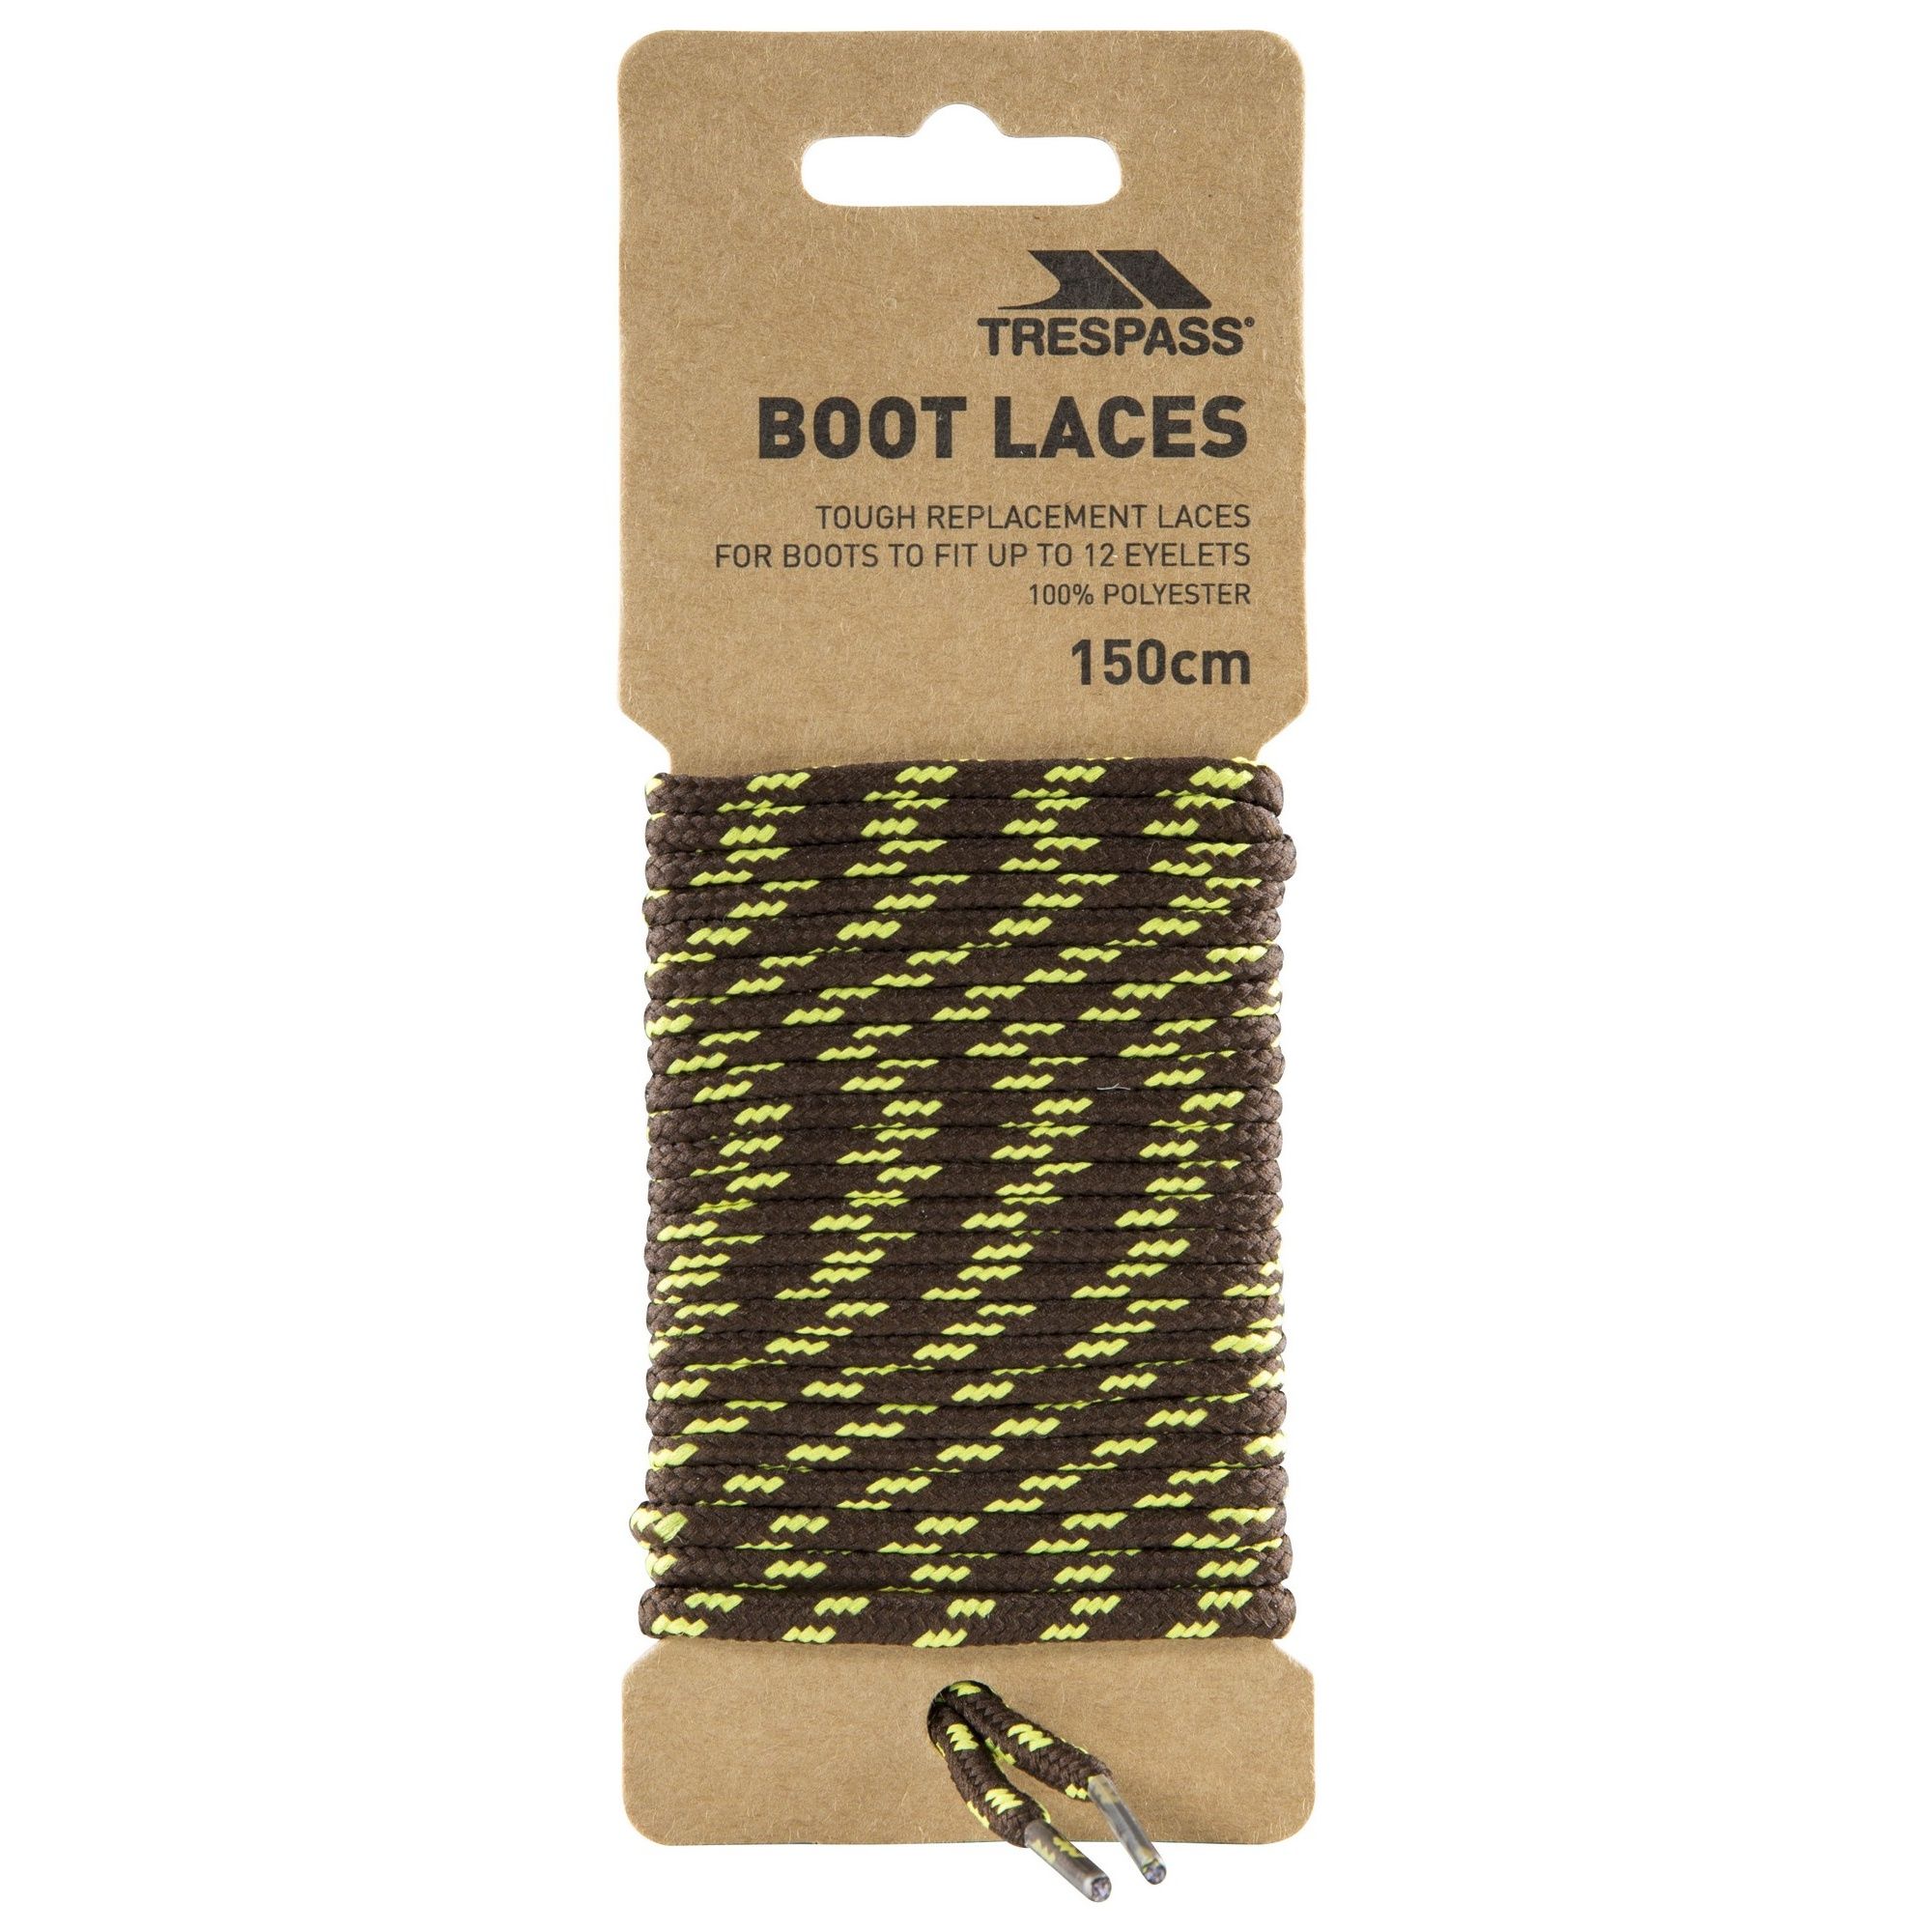 Boot laces. 150cm/59 inch. 100% Polyester.